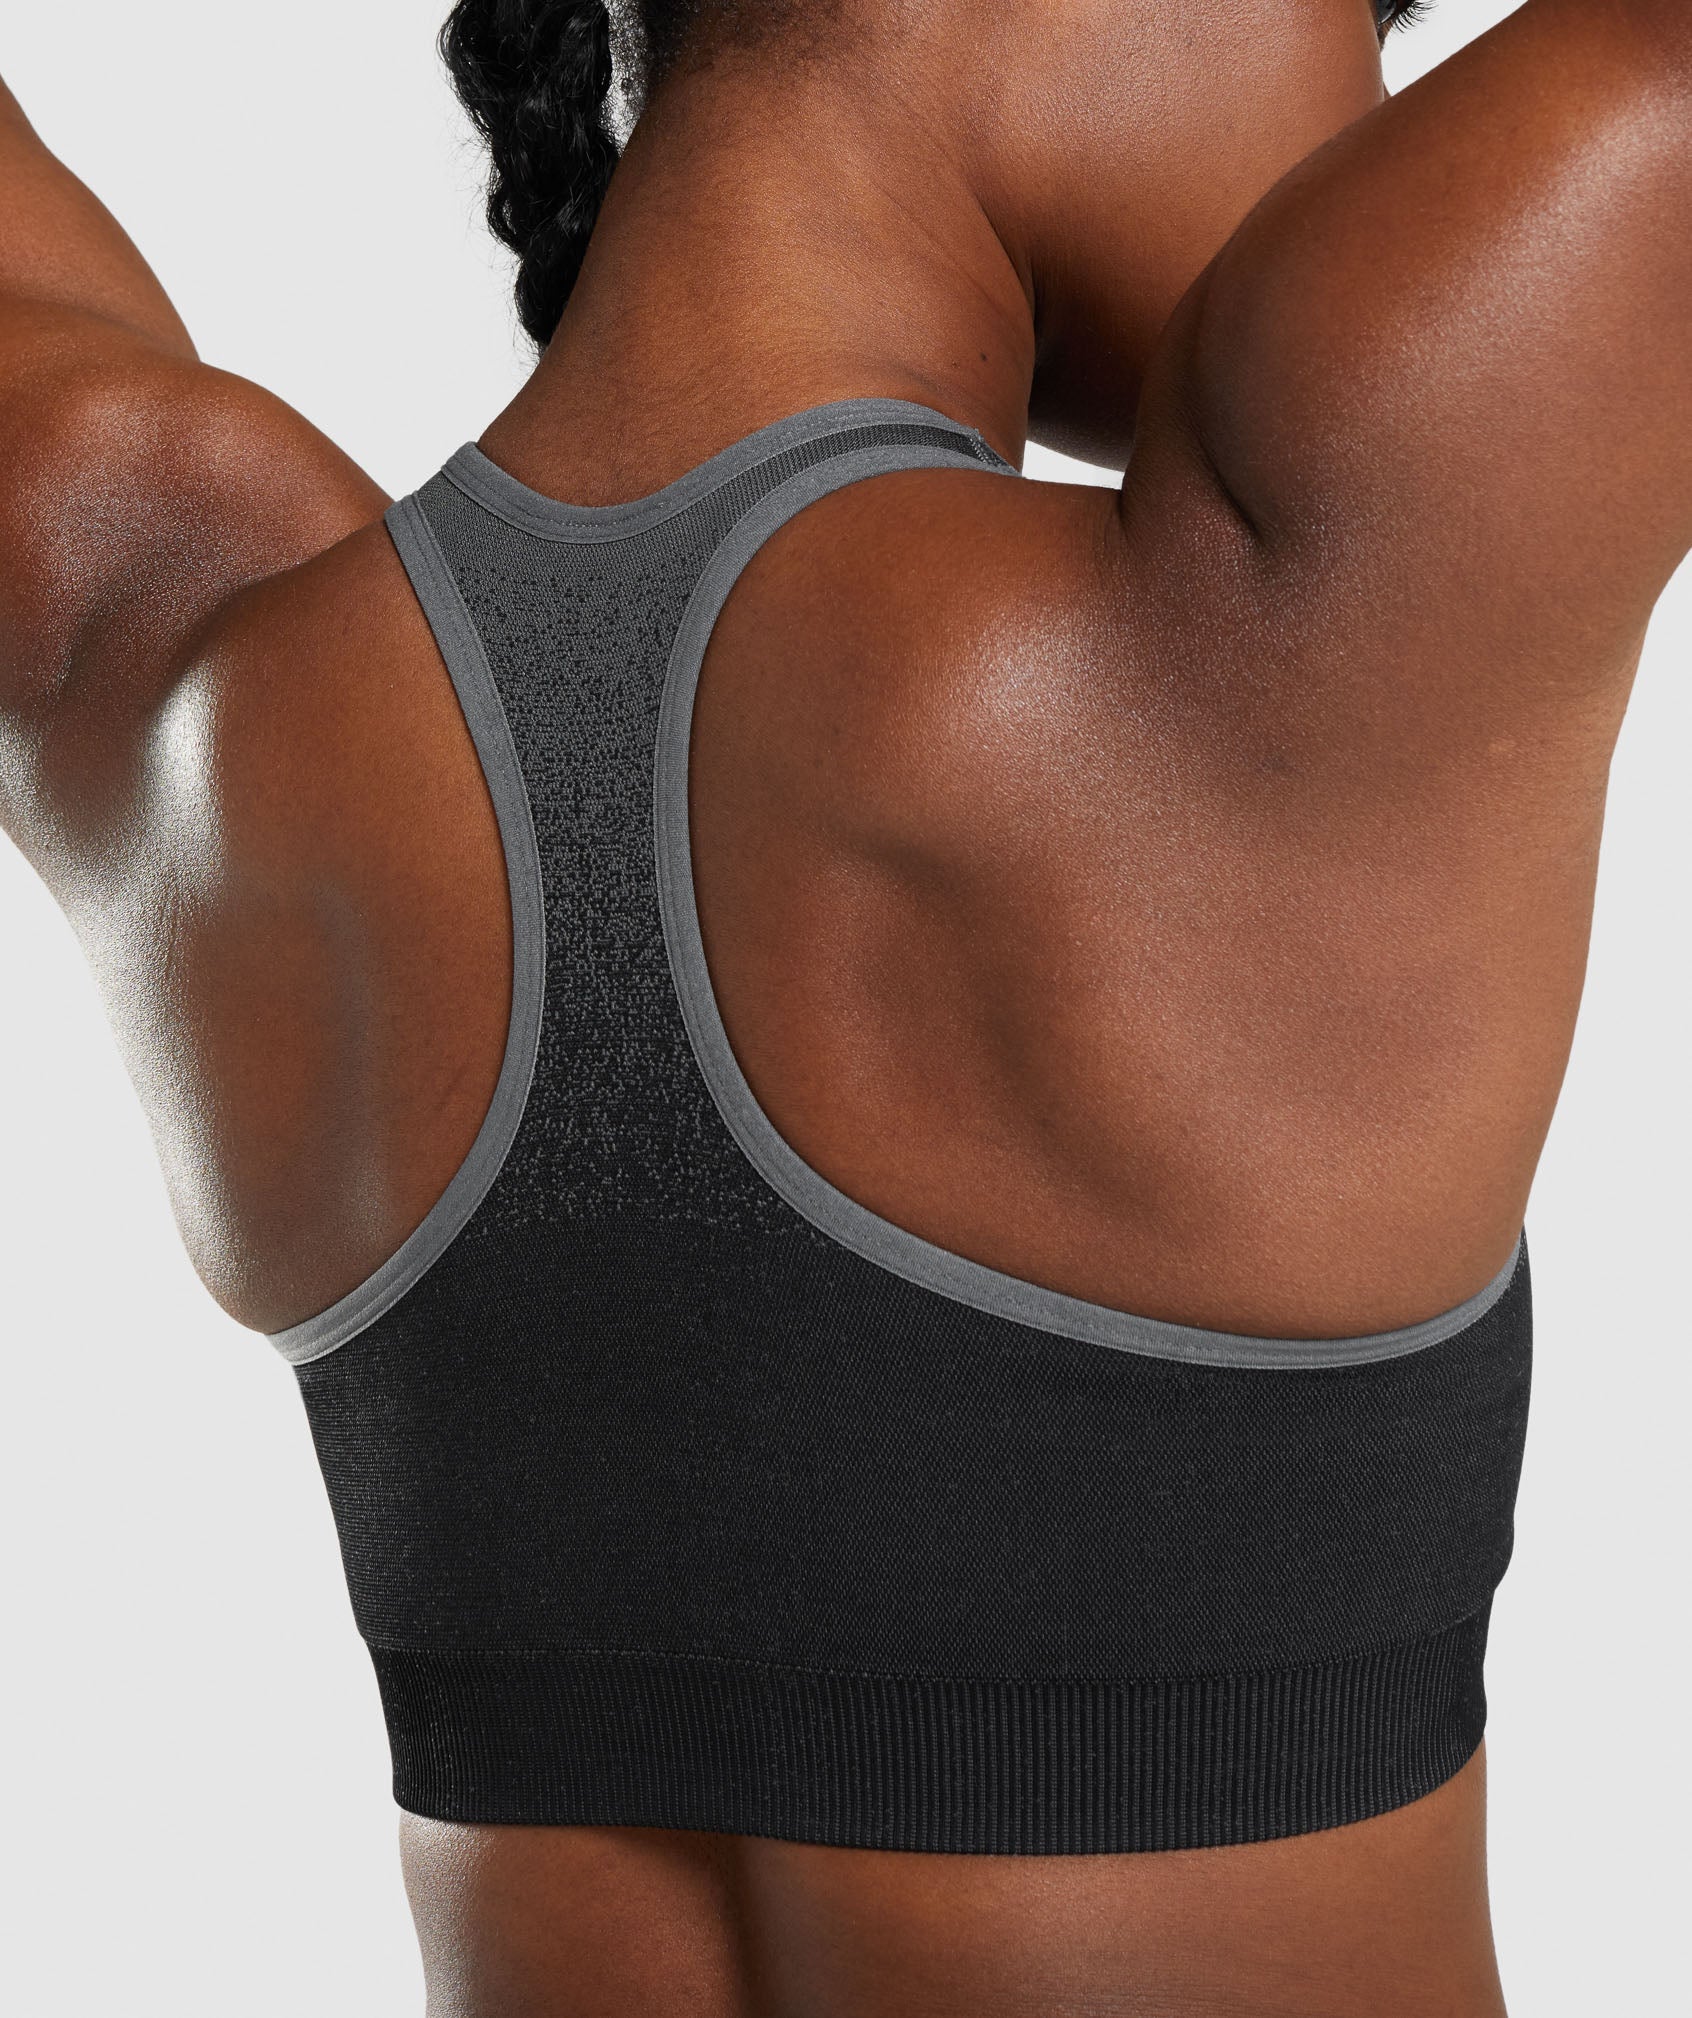 Adapt Ombre Seamless Sports Bra in Black/Grey - view 5